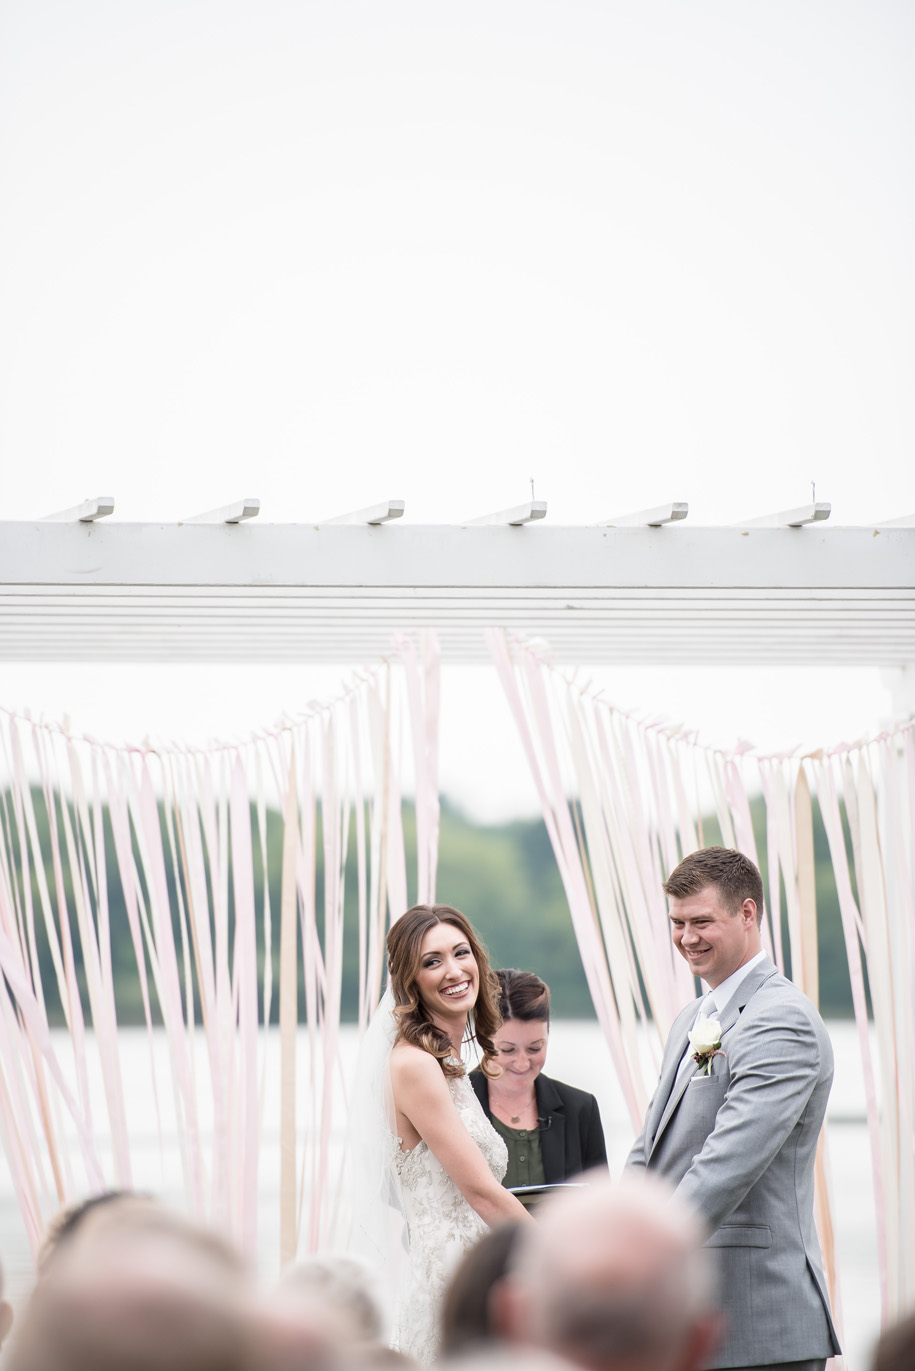 The ribbons swaying in the wind at the altar for this outdoor wedding ceremony is gorgeous. Made extra special by this giggling bride.